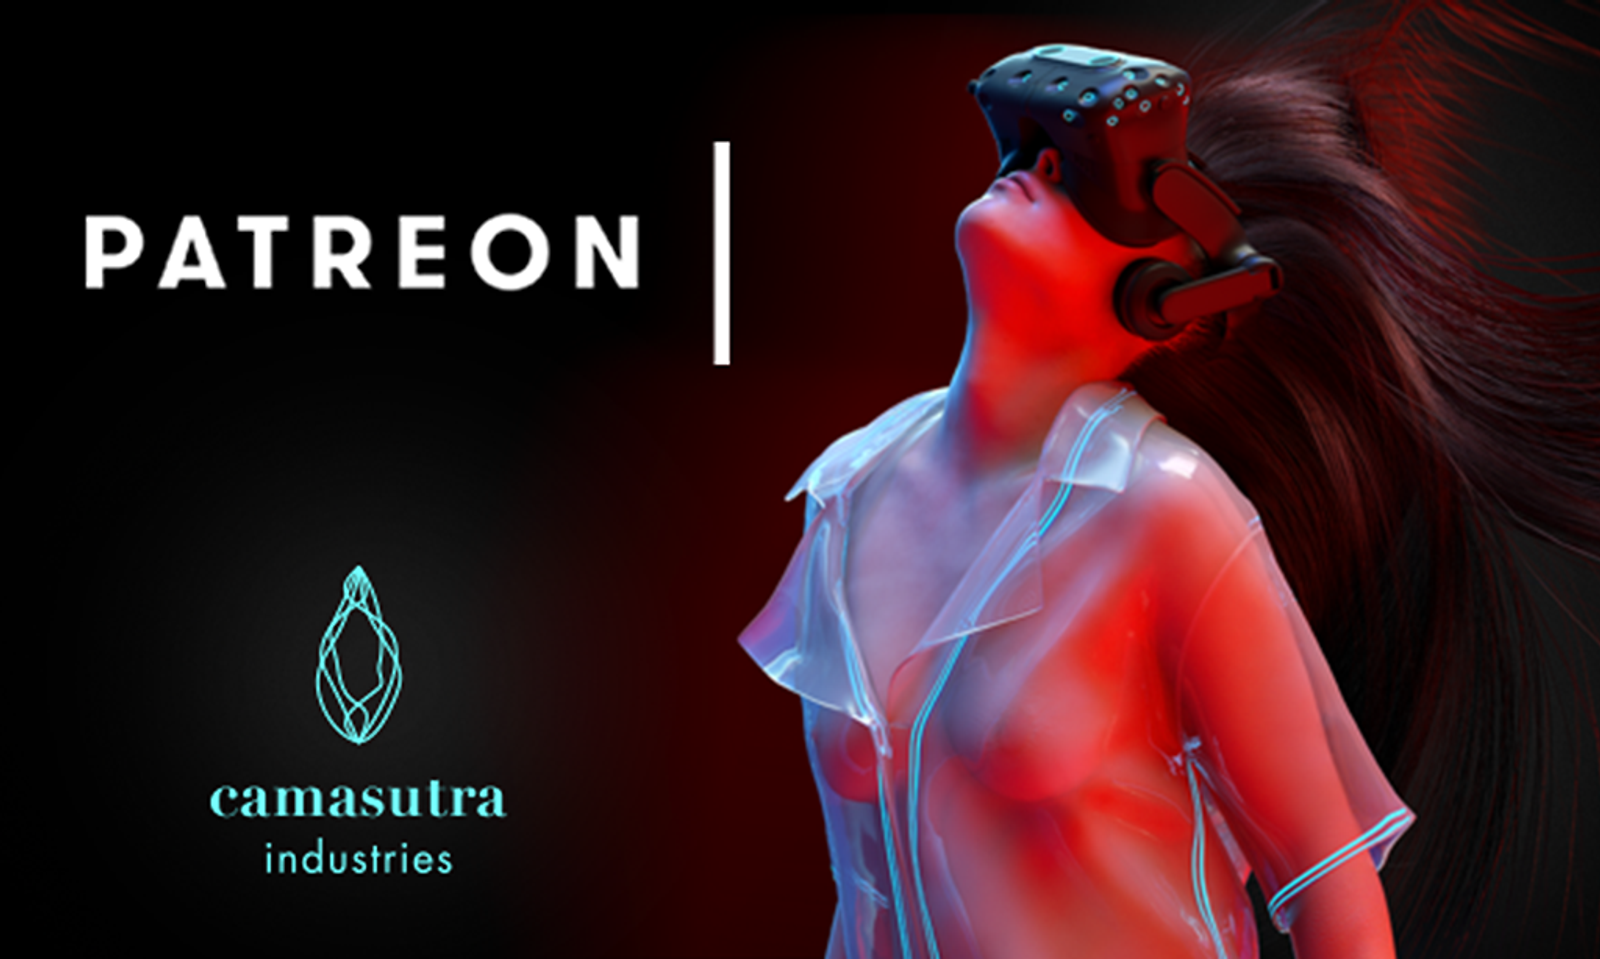 Camasutra Industries Offers Patreon Contributors Chance to Direct